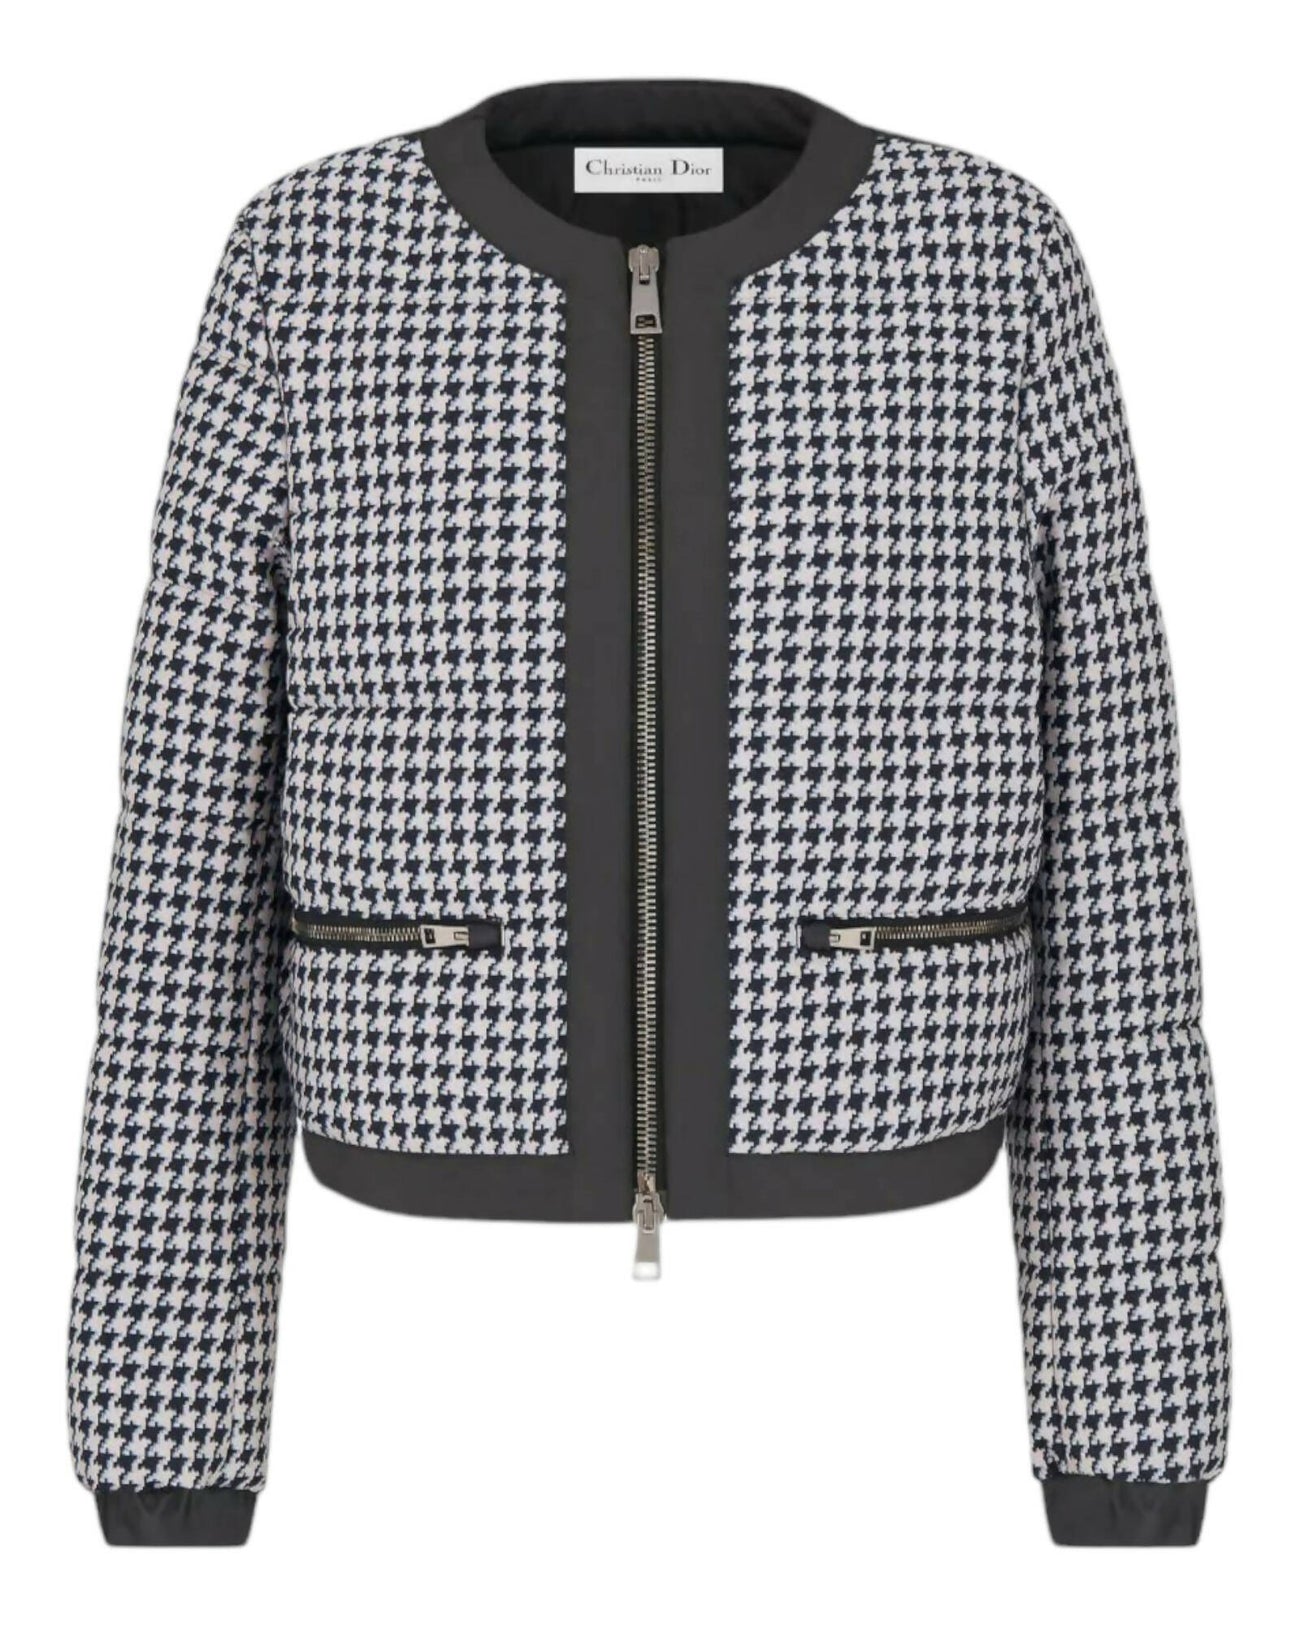 Christian Dior, Houndstooth Virgin Wool and Silk Quilted Jacket